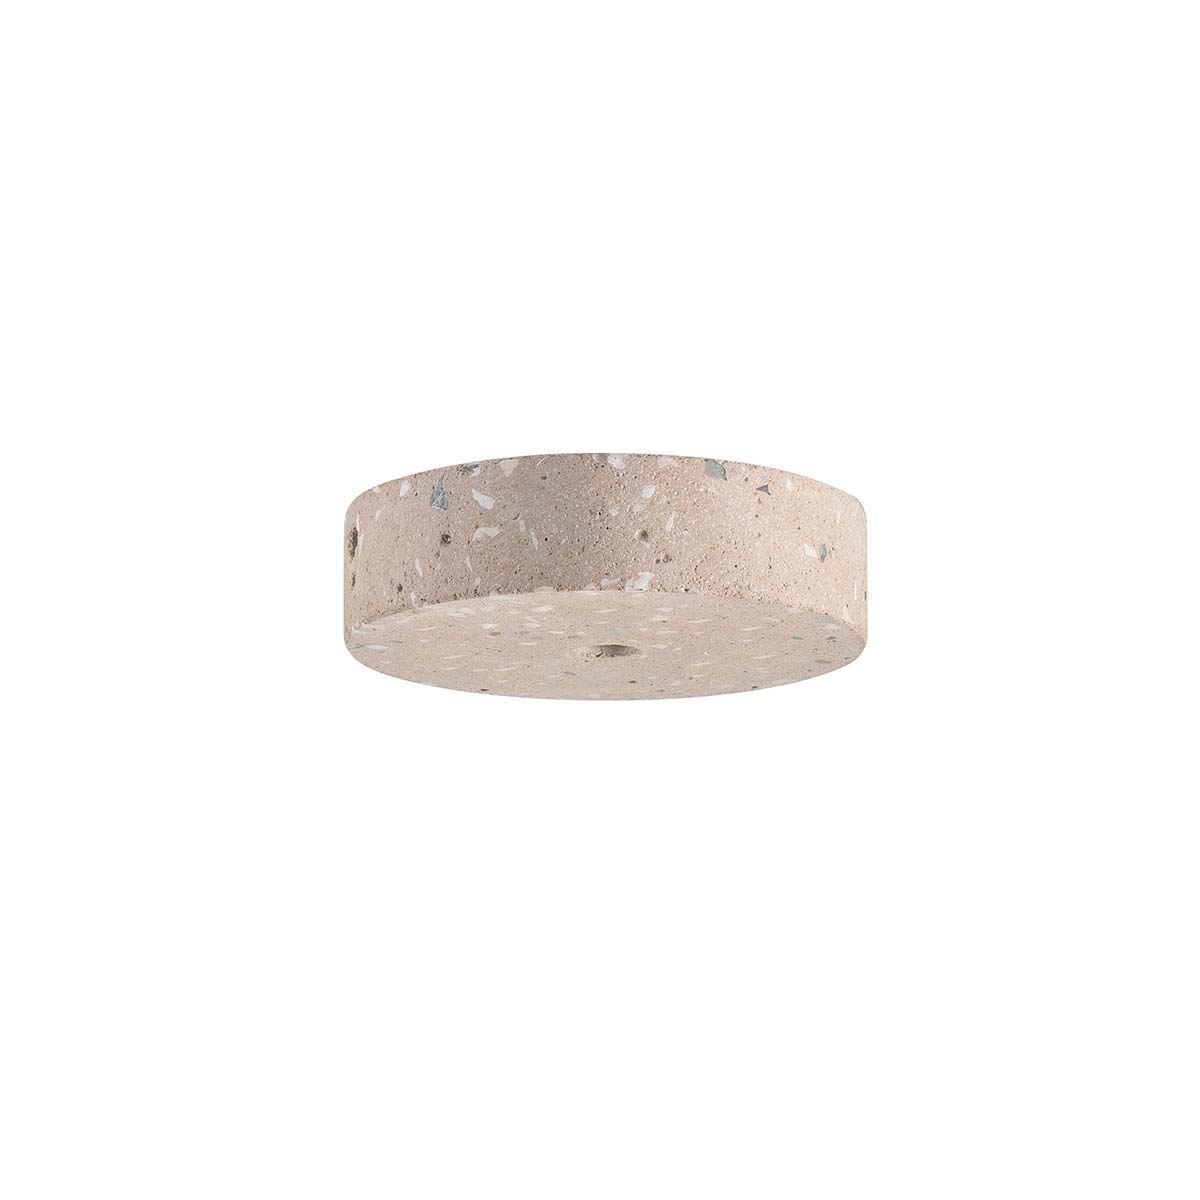 Tangla lighting - TLCP024-01CR - Water stone 1 Light round canopy stage - concrete